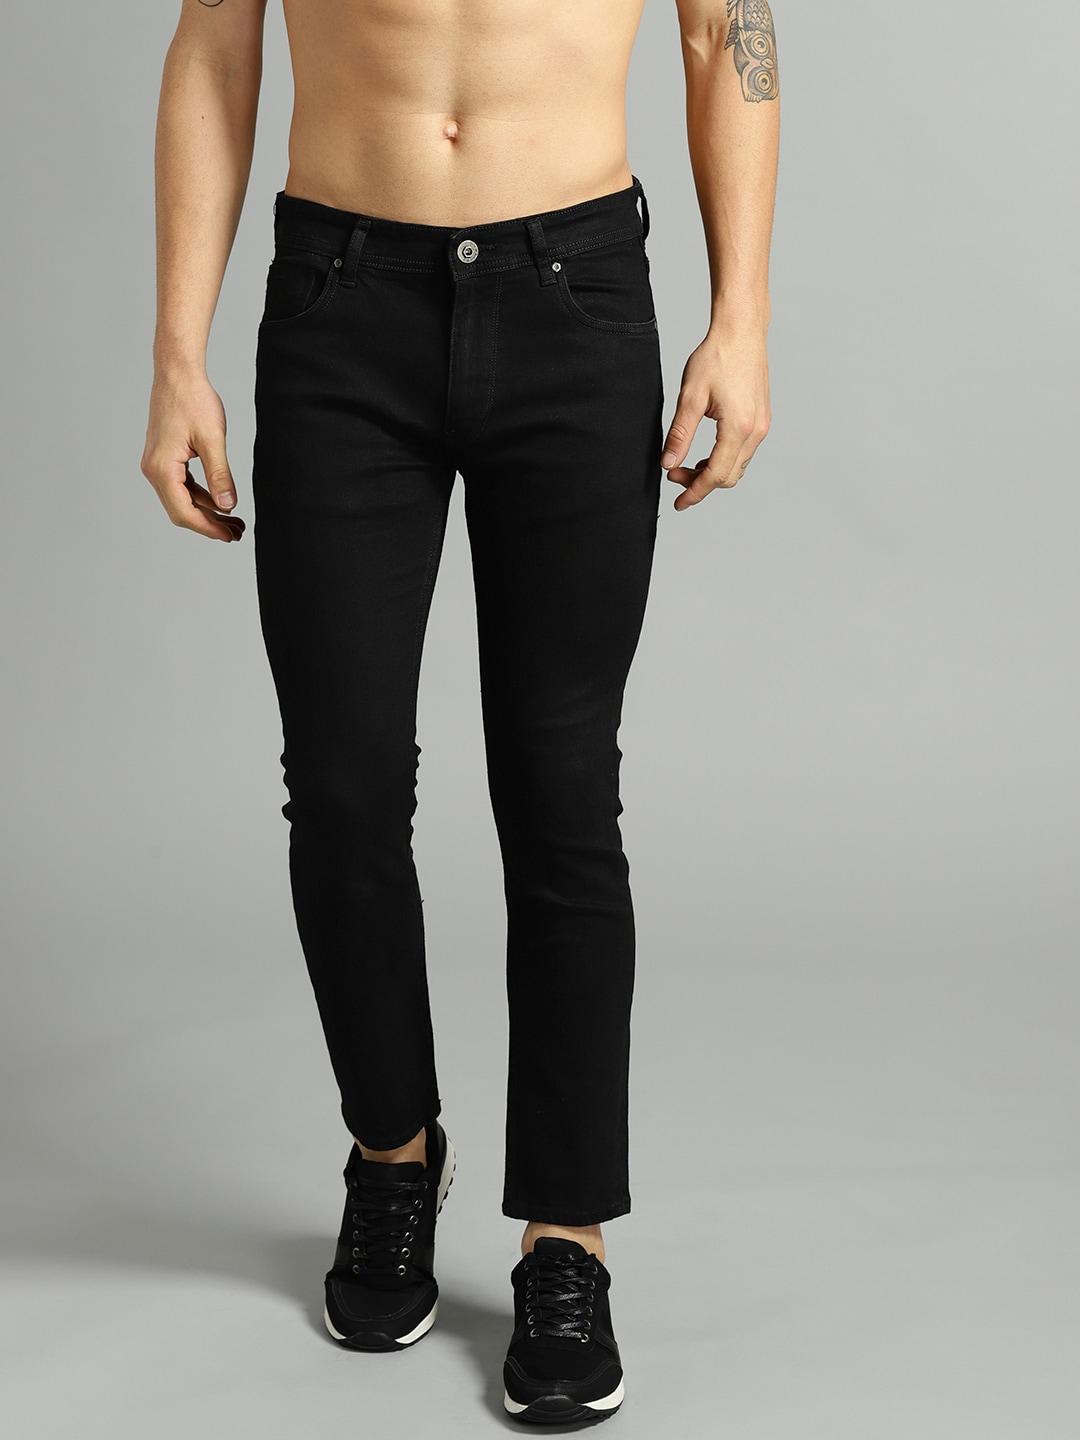 roadster-men-black-skinny-fit-mid-rise-clean-look-stretchable-jeans